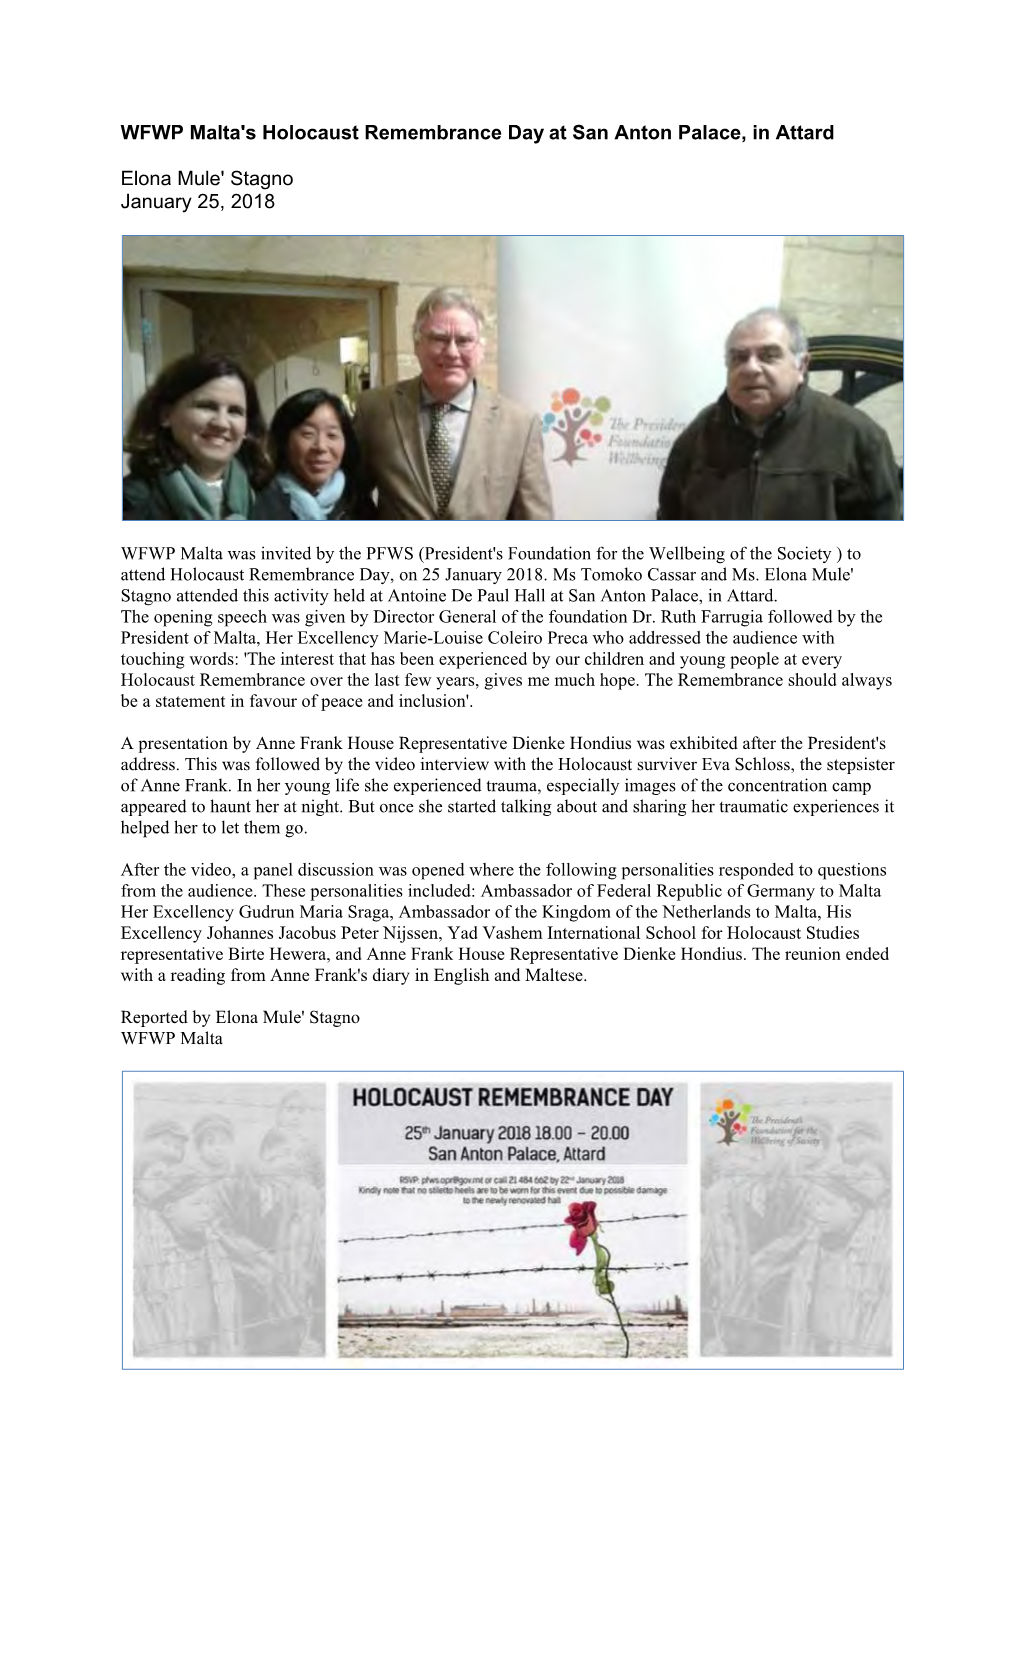 WFWP Malta's Holocaust Remembrance Day at San Anton Palace, in Attard